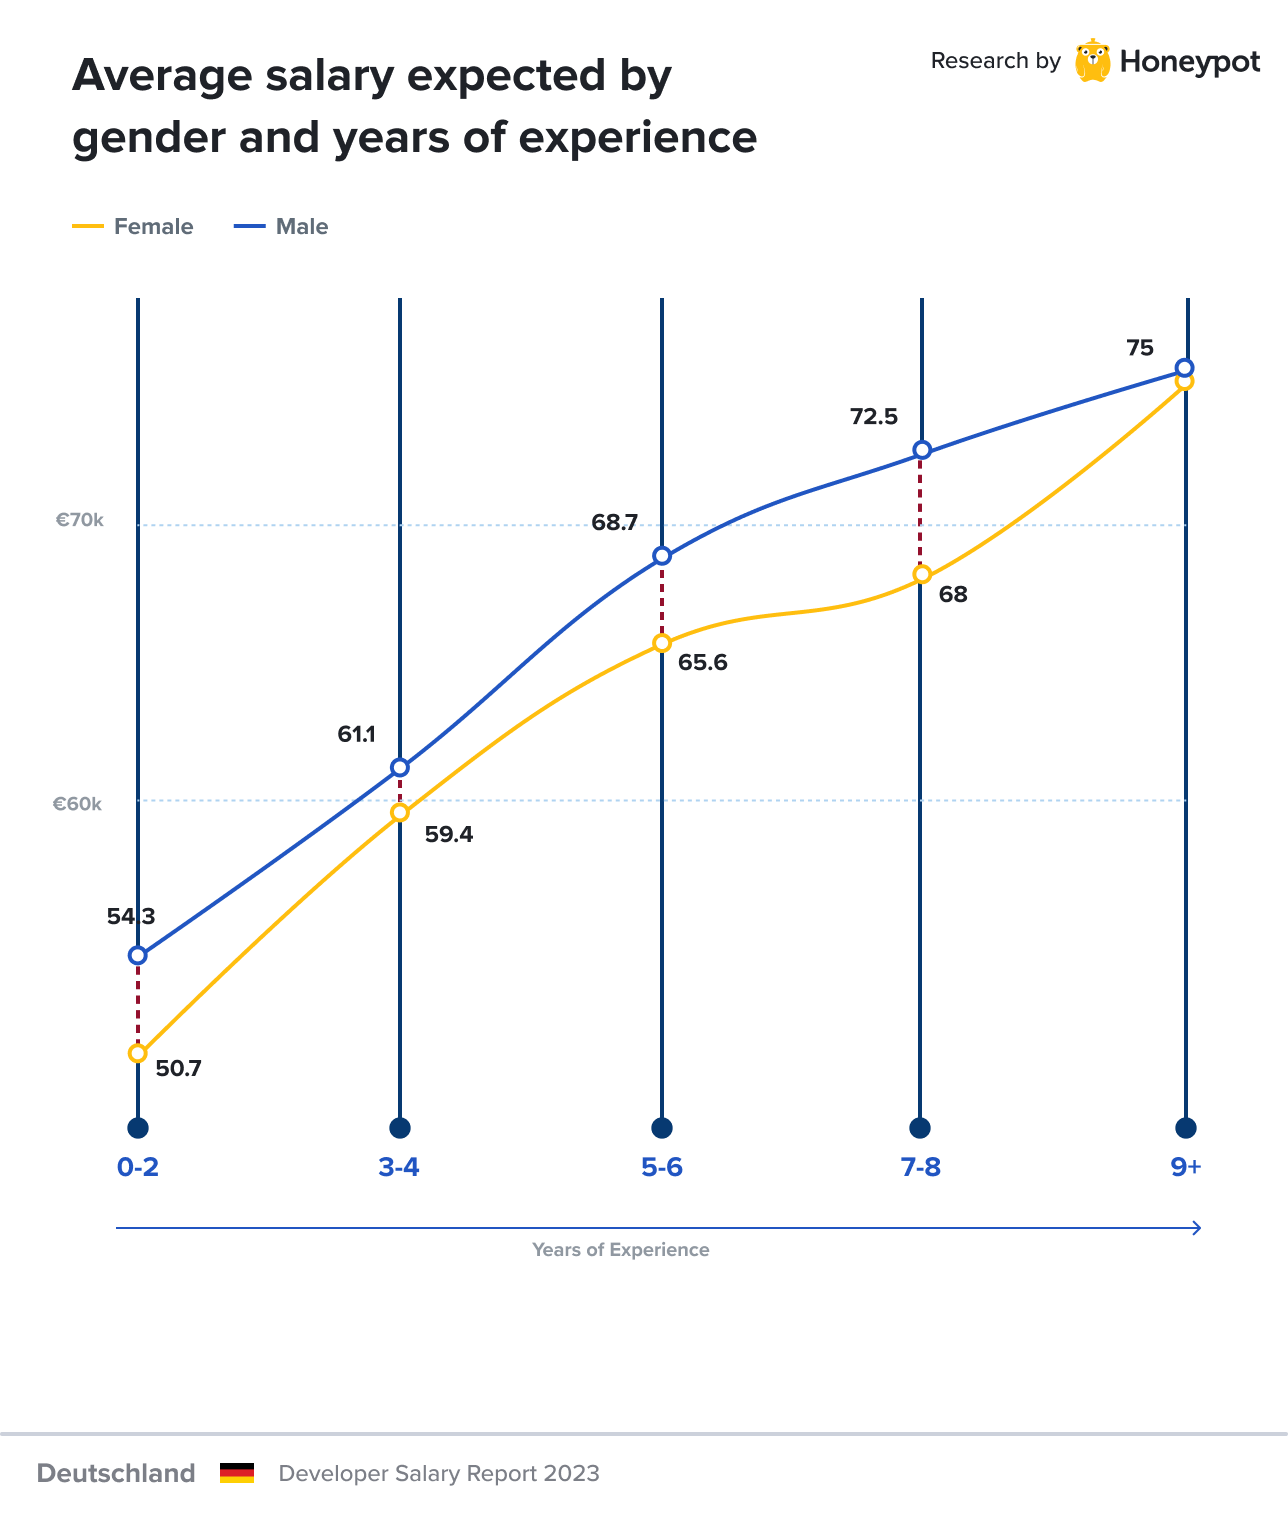 Germany – Average expected by gender and years of experience